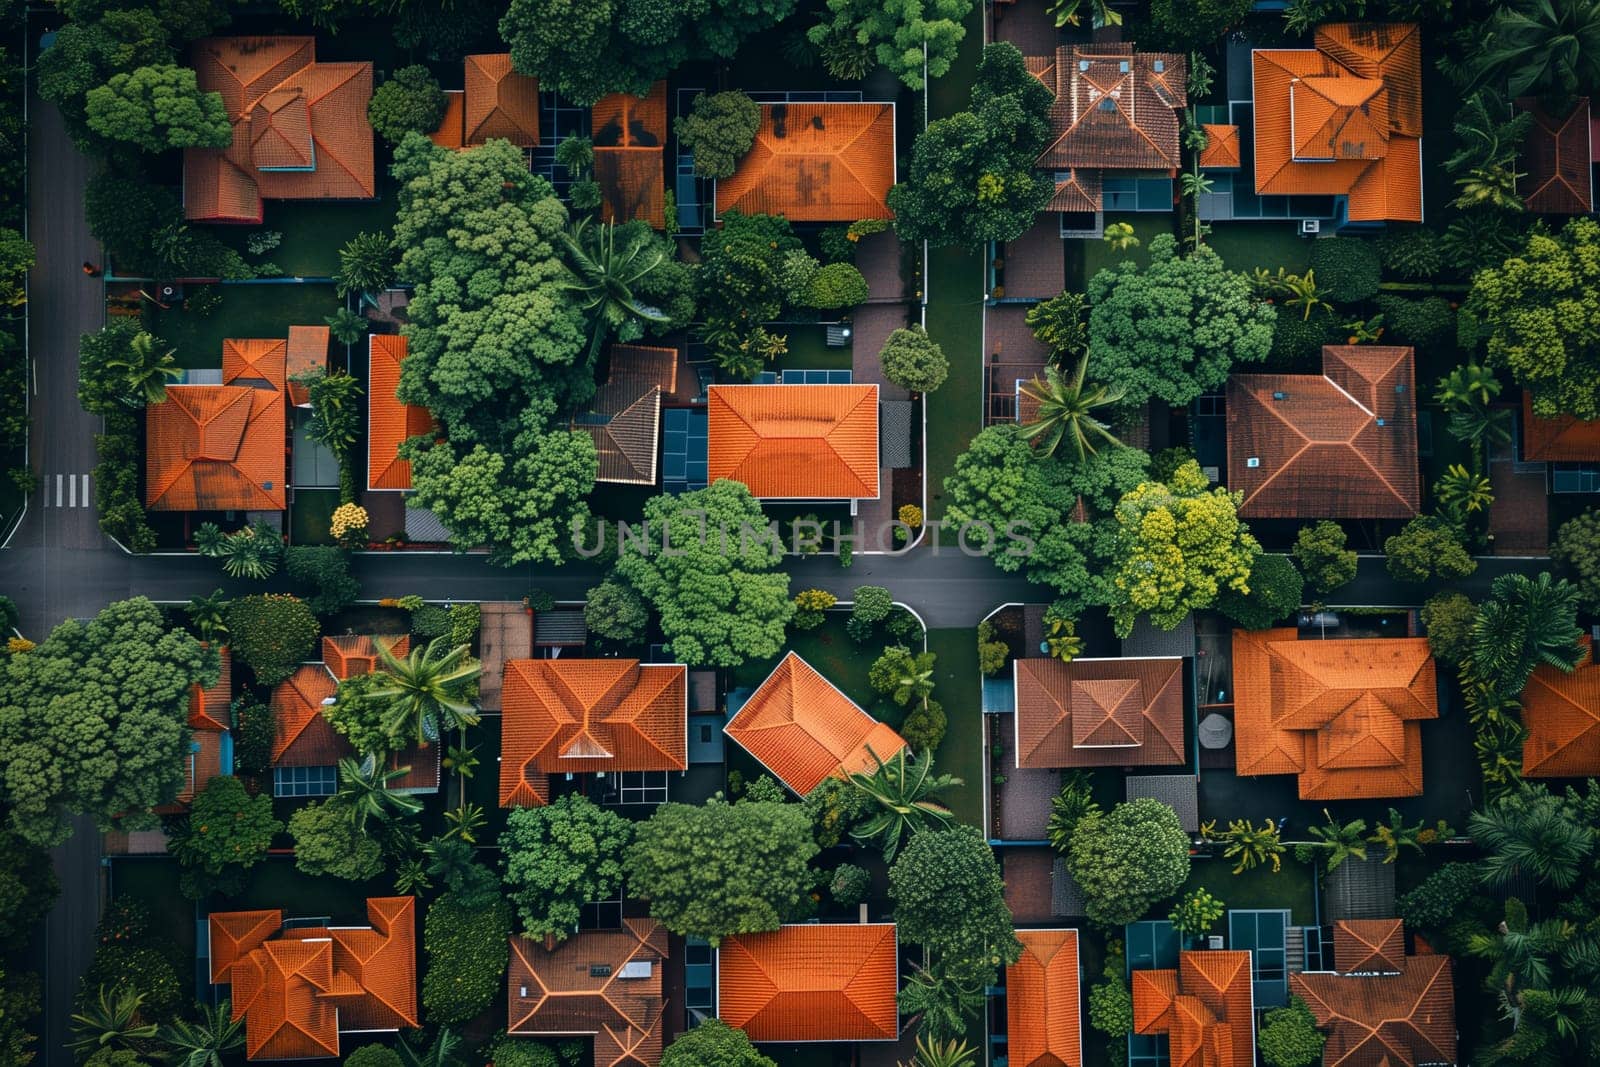 An aerial perspective of a house located amidst a cluster of trees.